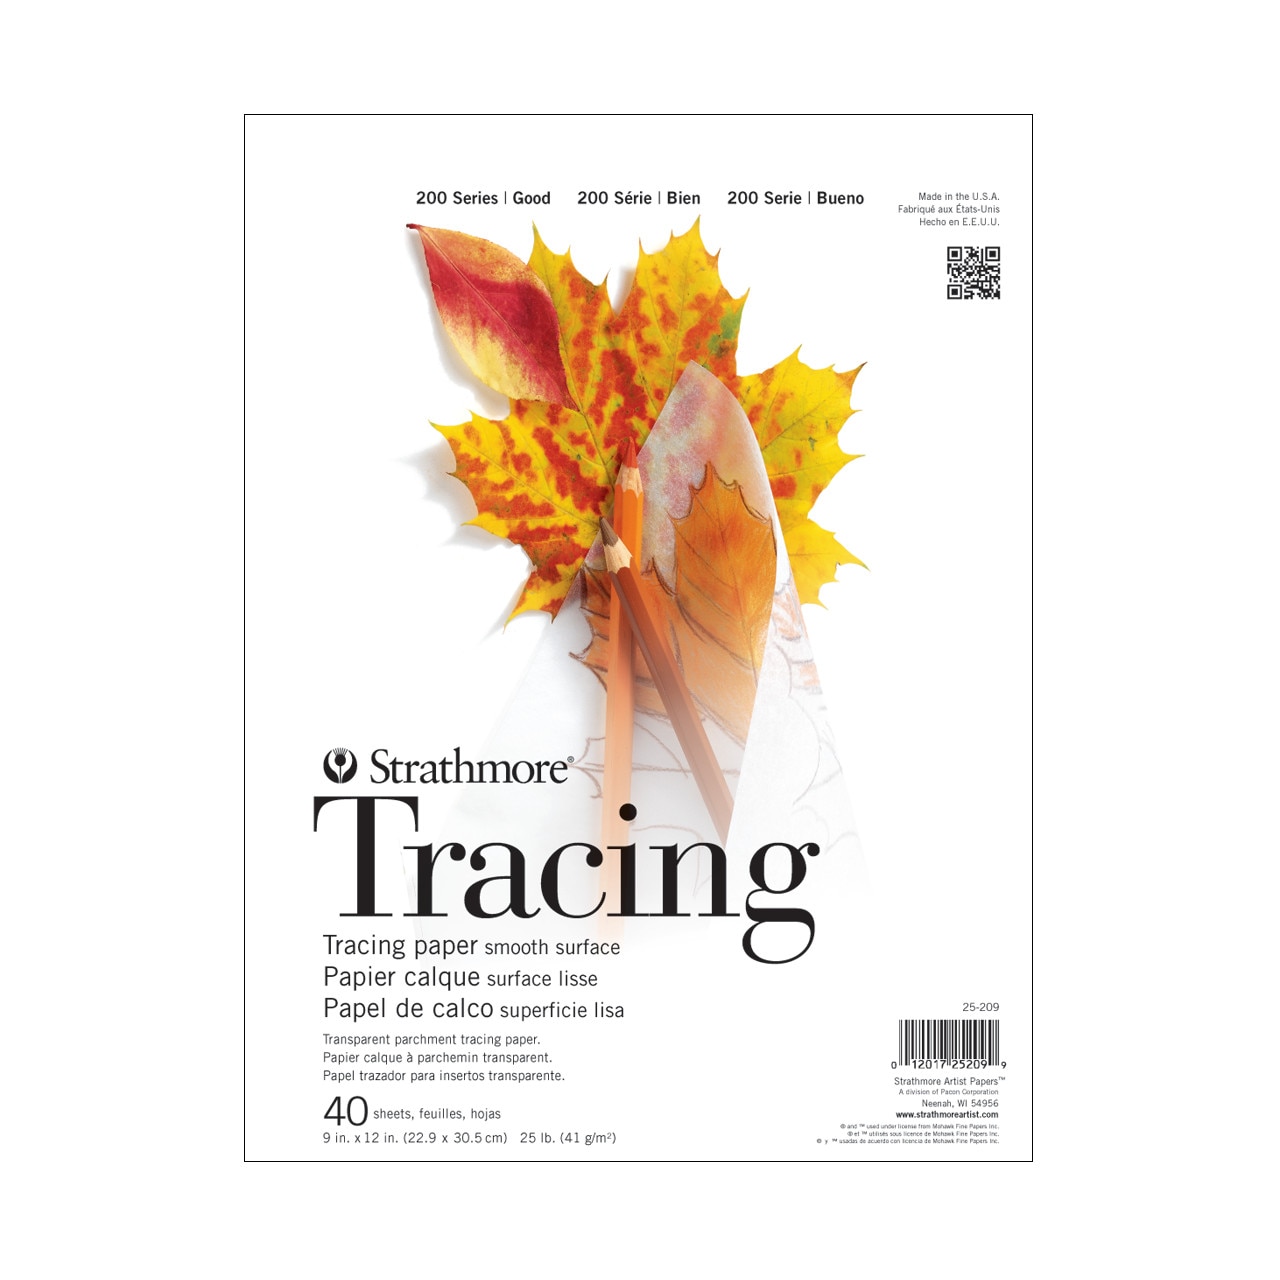 Strathmore Tracing Paper Pad, 200 Series, 9" x 12", 40 Sheets